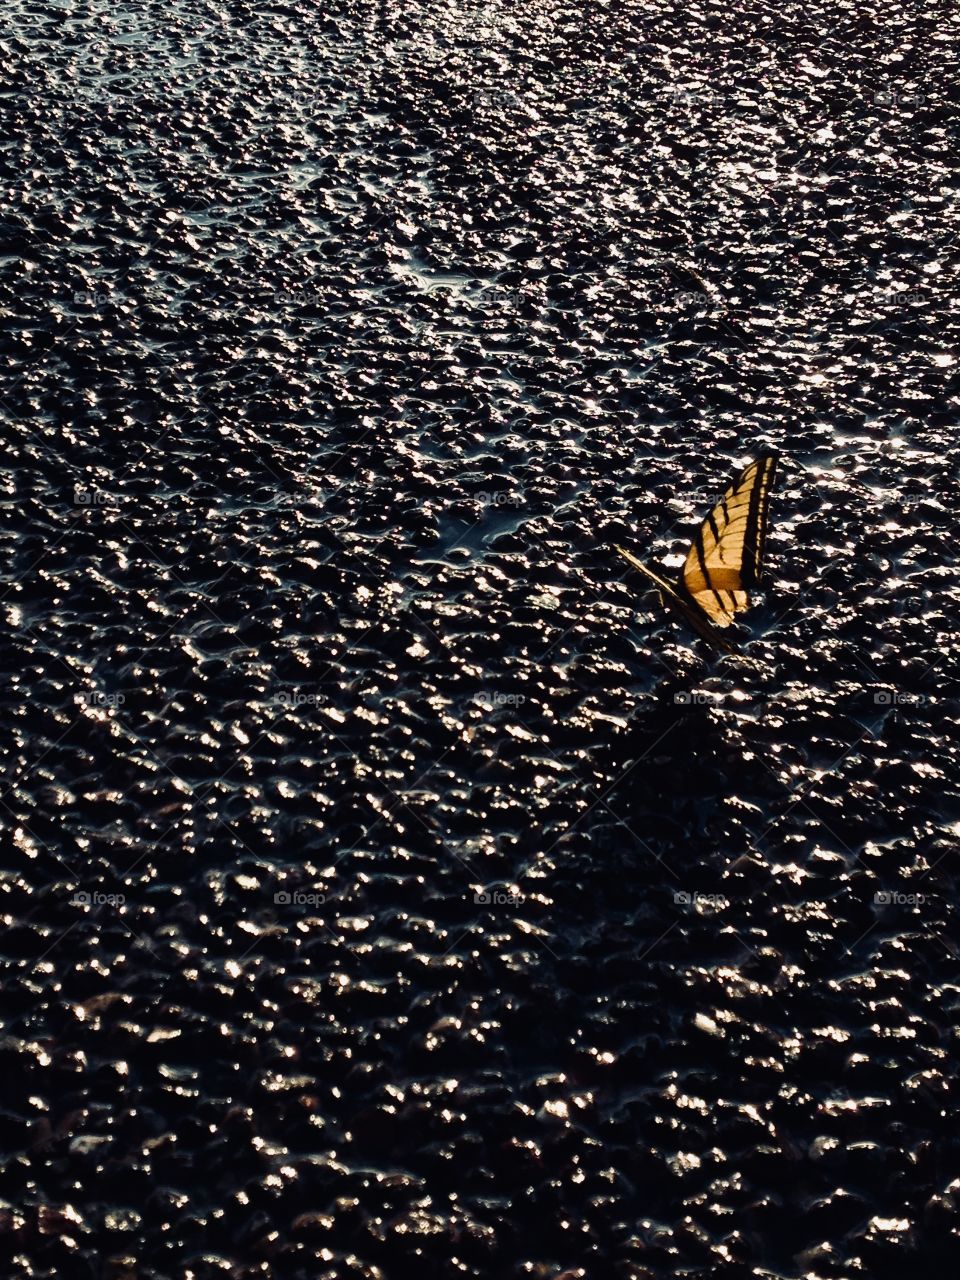 Yellow and Black Butterfly on Asphalt